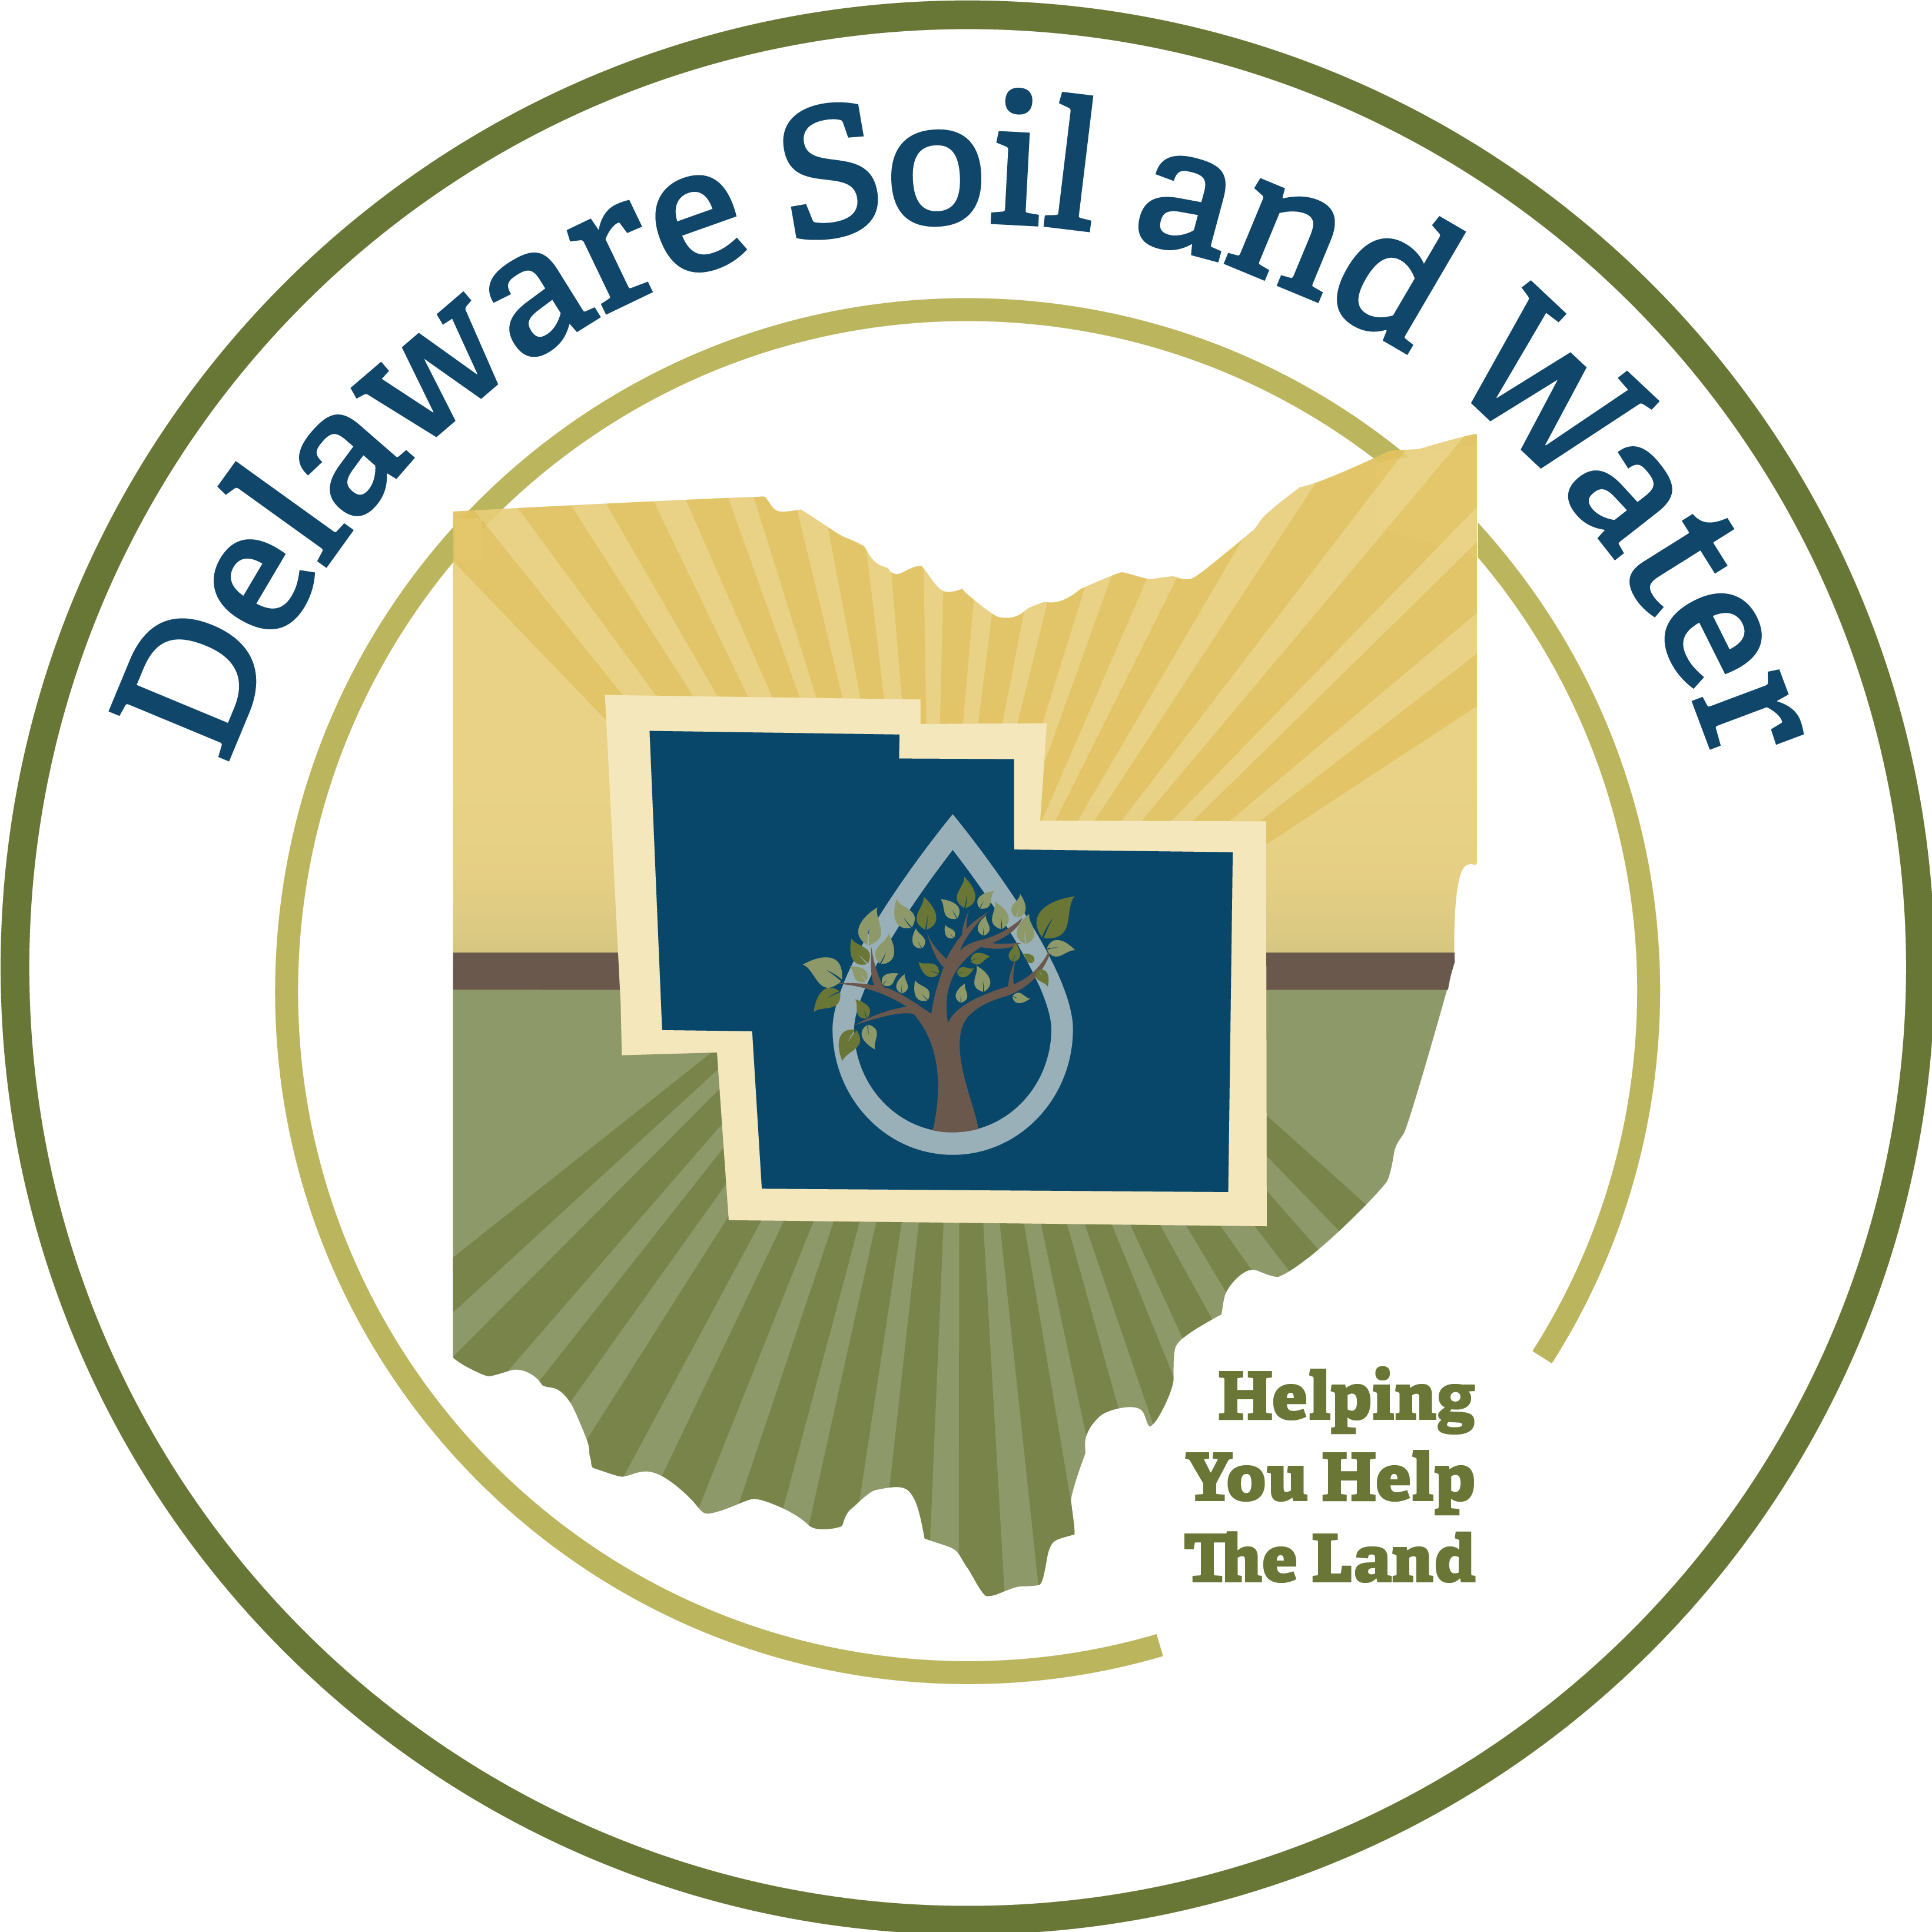 Image of Delaware County Soil & Water